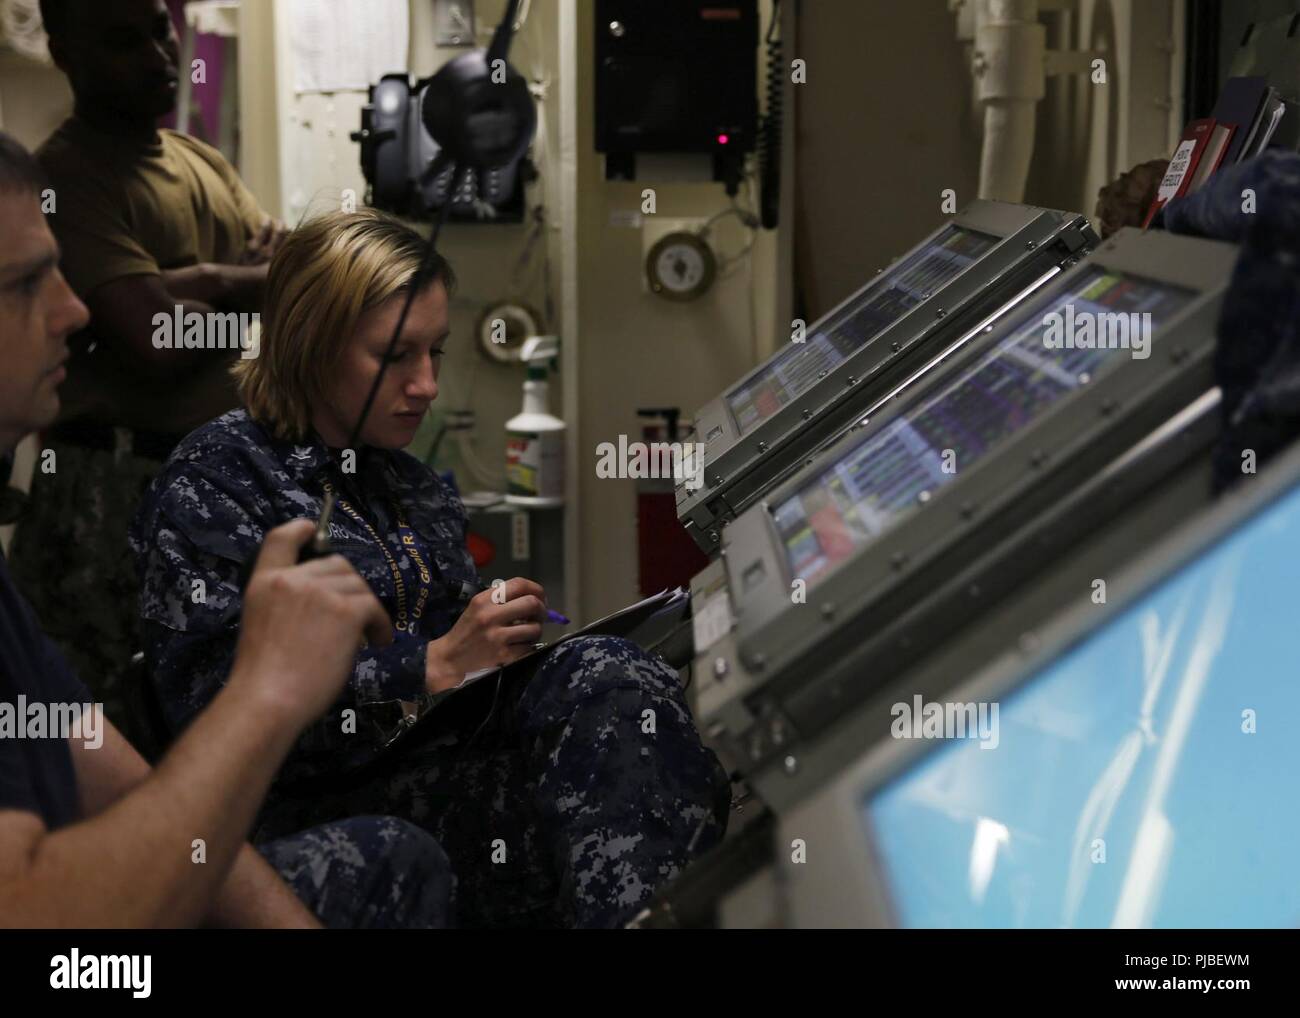 NORFOLK, Va. (July 11, 2018)  Aviation Boatswain's Mate (Fuel) 3rd Class Autumn Landrum, from Oliver Springs, Tennessee, assigned to USS Gerald R. Ford's (CVN 78) air department, logs fuel tank gallons and start times during a fuel offload. Ford is currently preparing to enter the shipyards for post shake down availability in Newport News, Virginia. Stock Photo